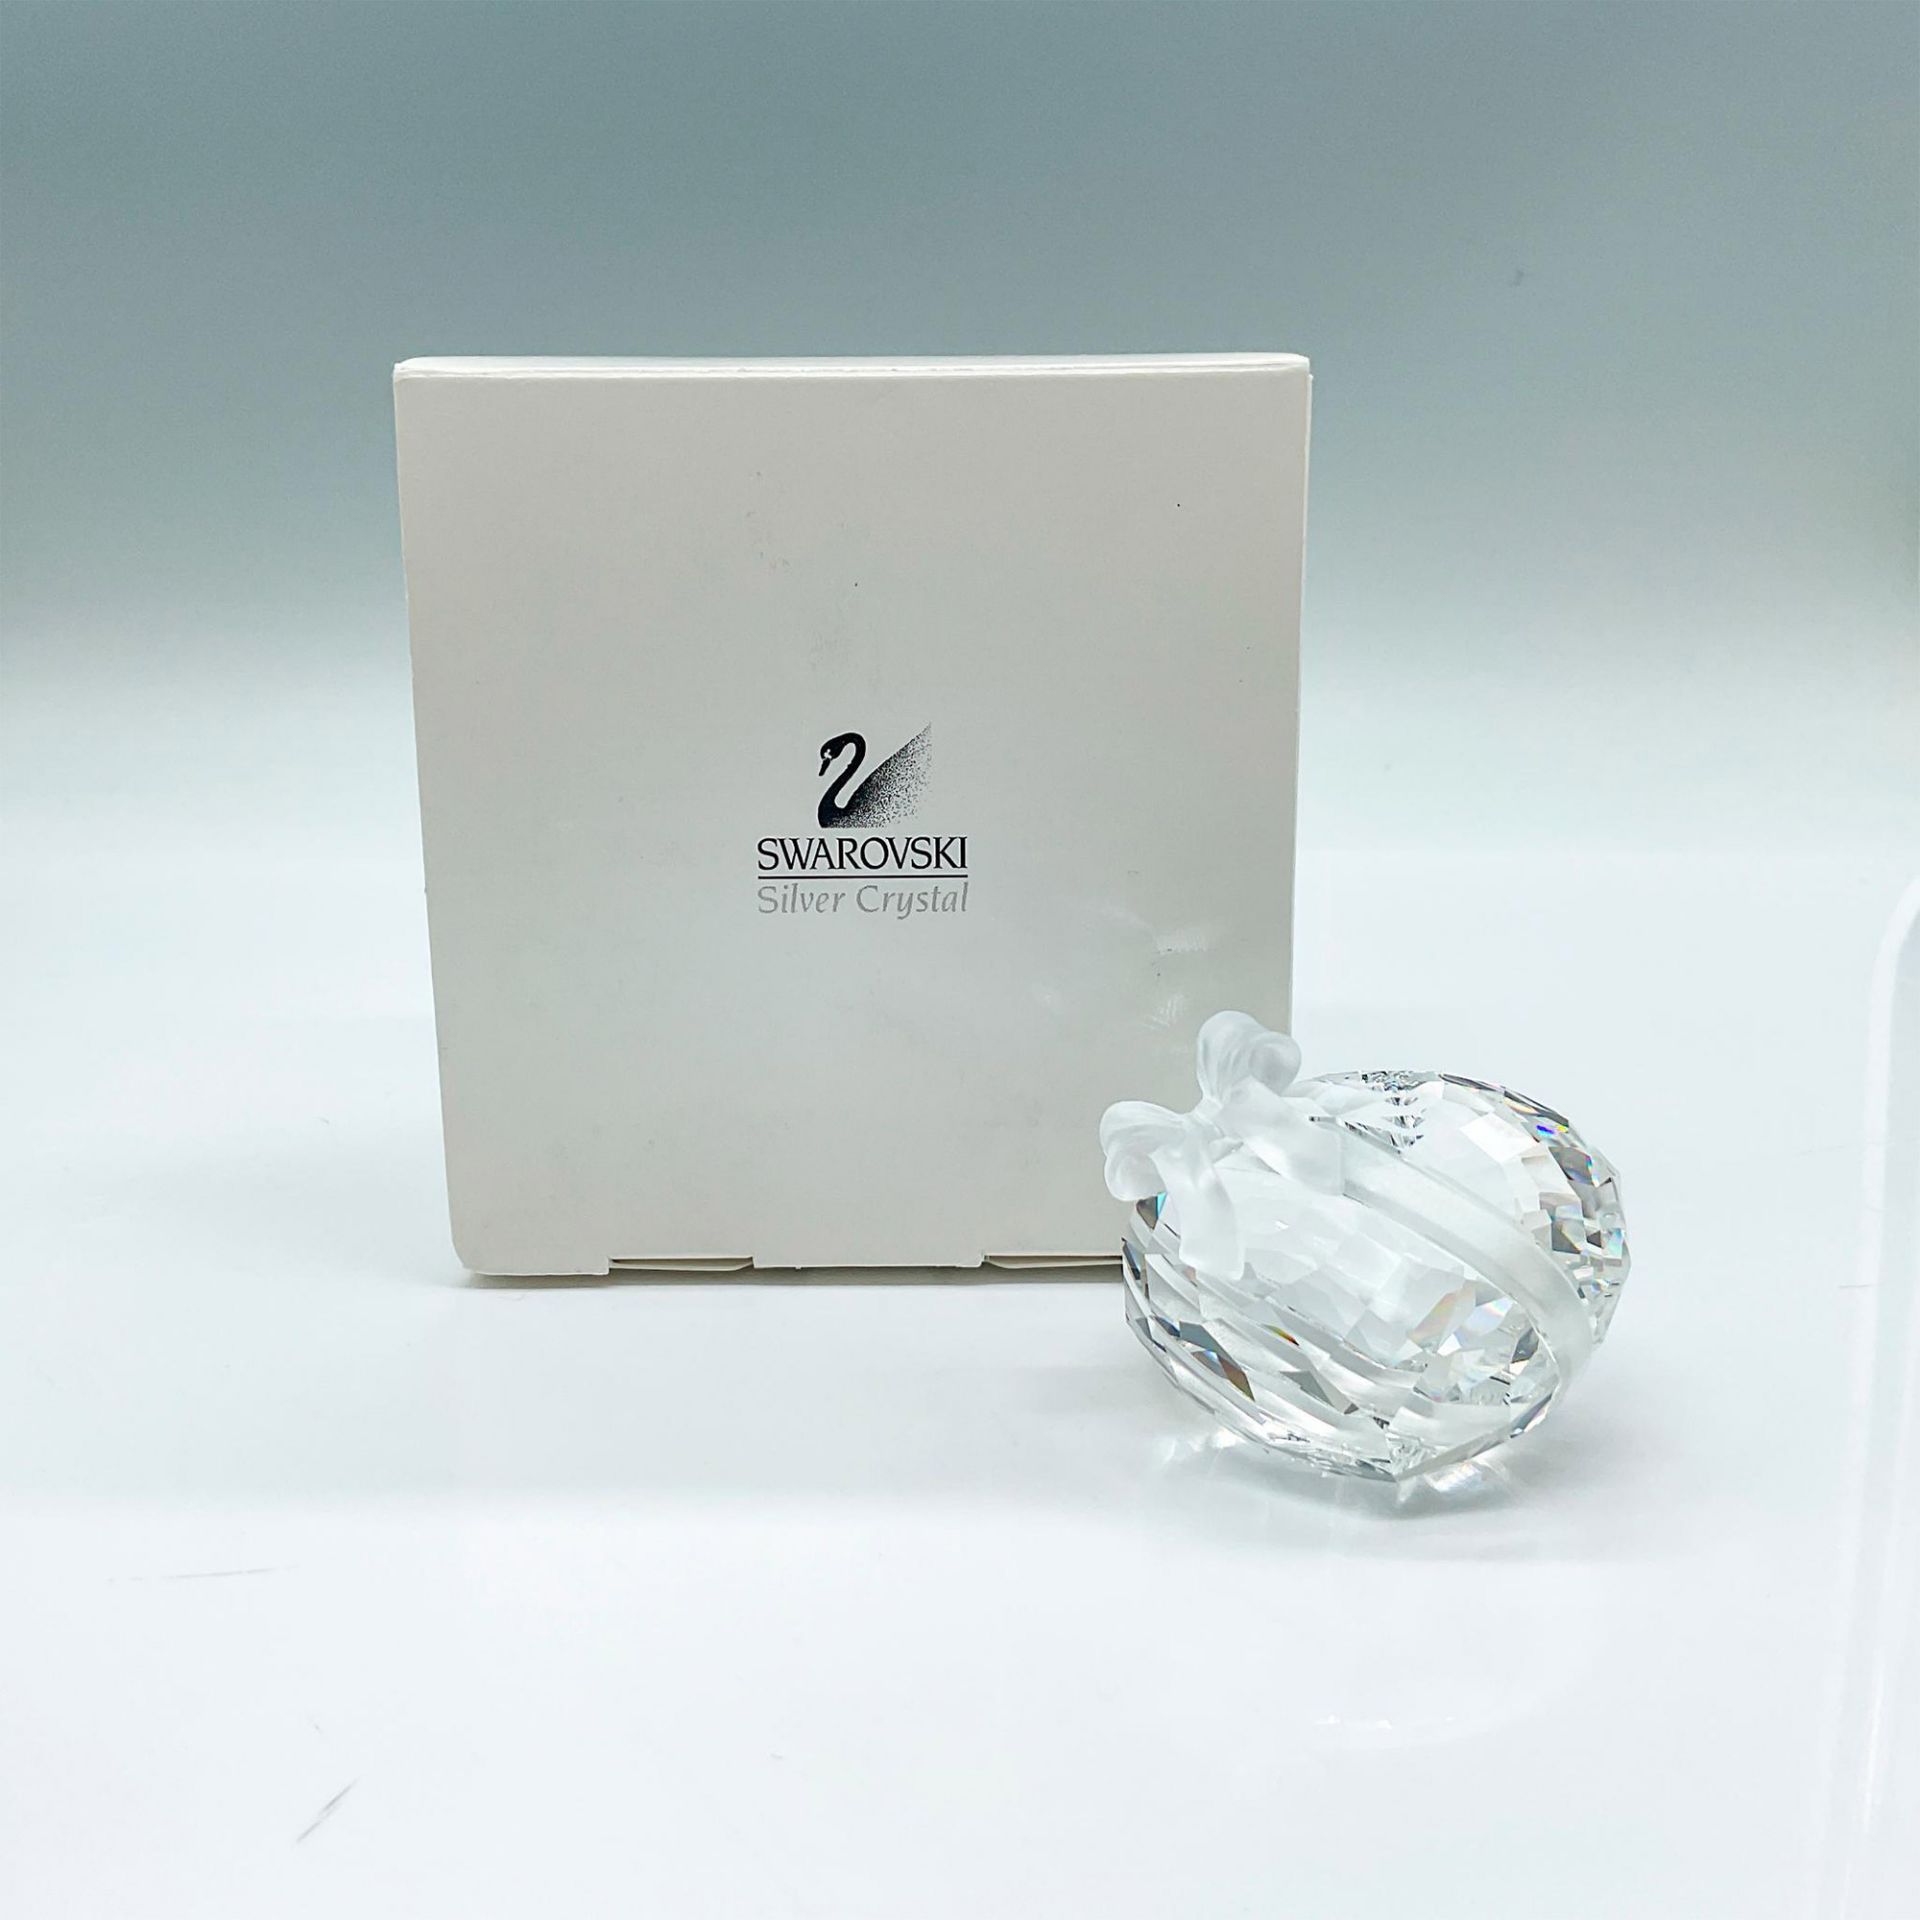 Swarovski Silver Crystal Paperweight, Sweetheart - Image 2 of 3